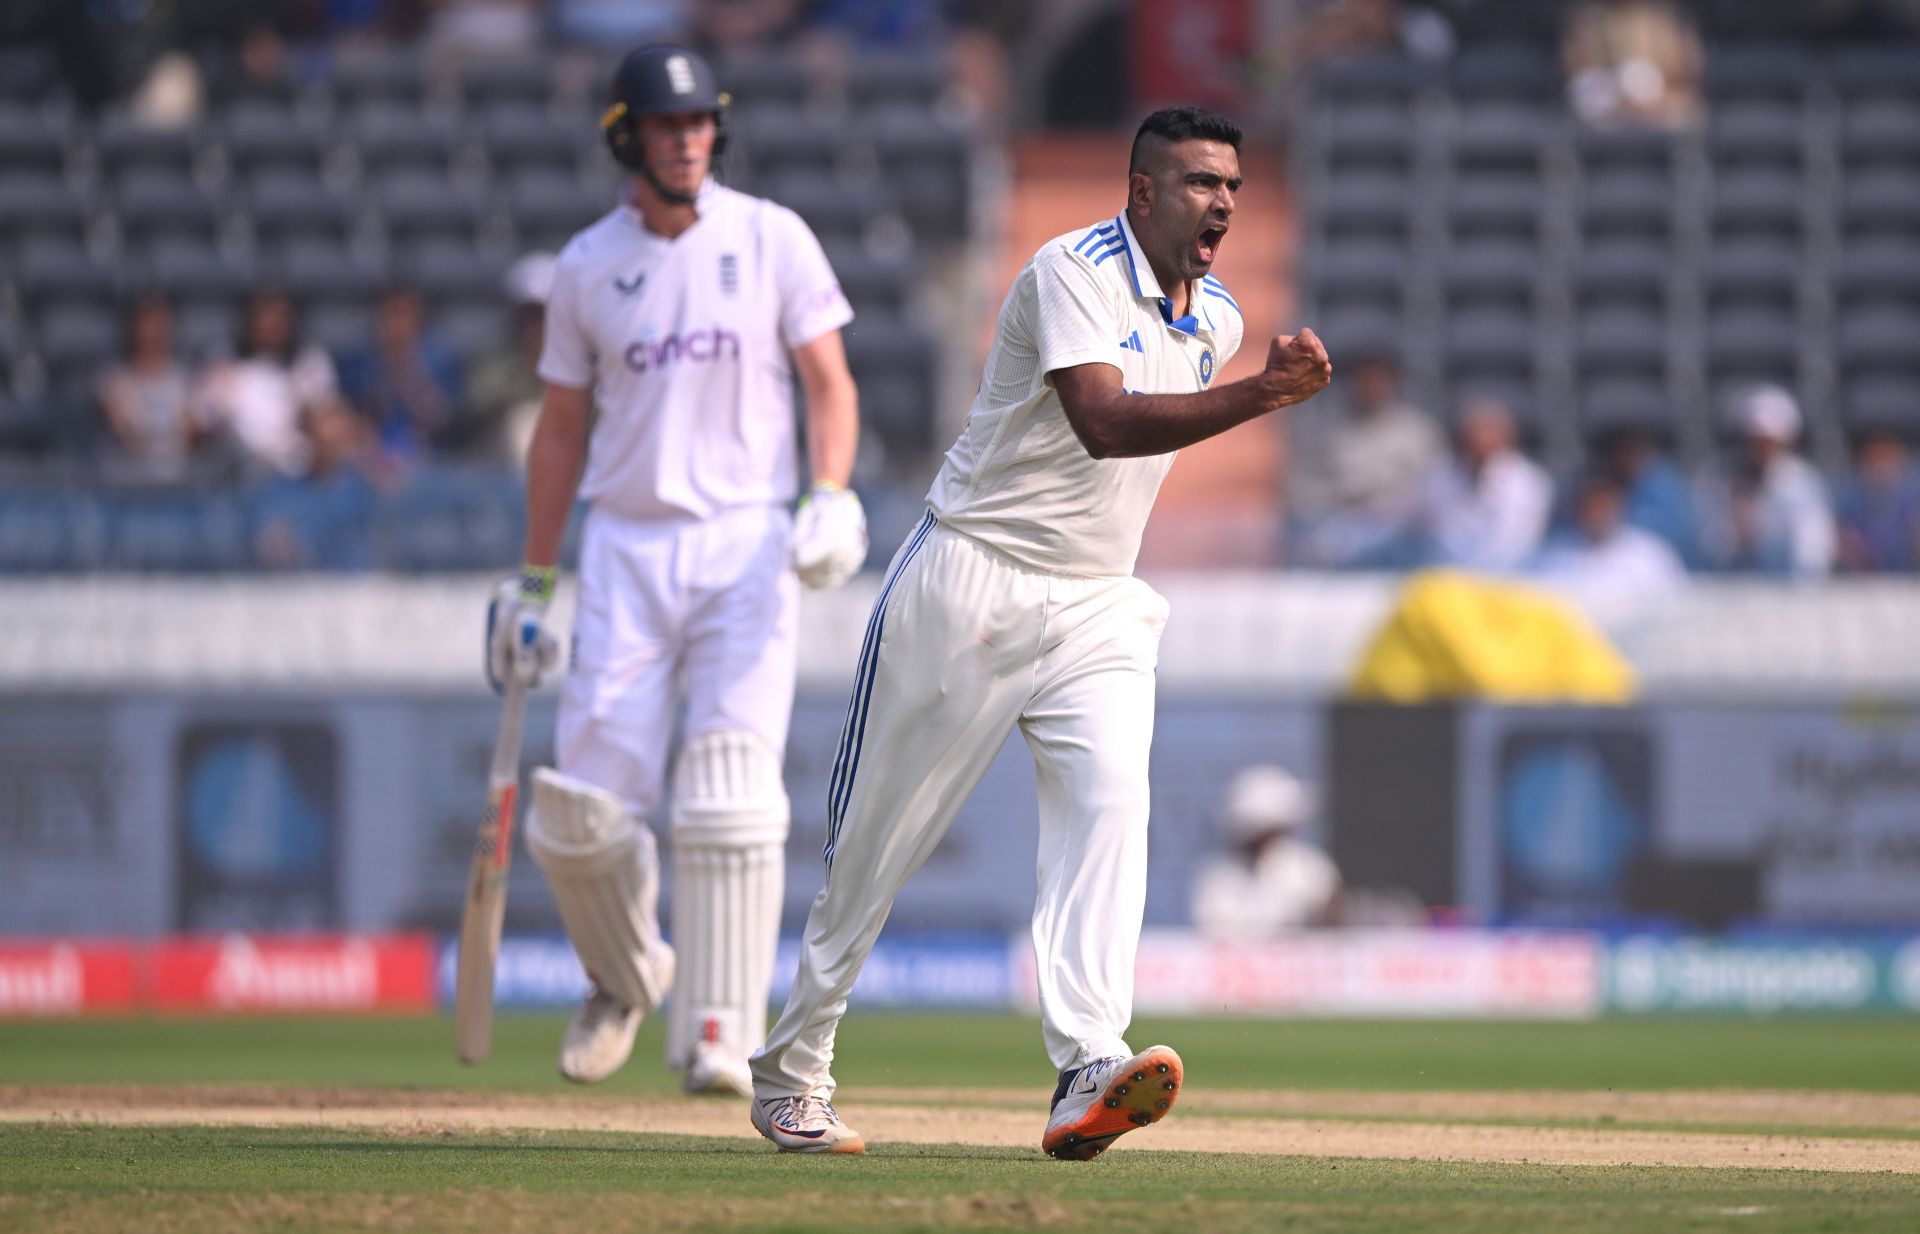 Ravichandran Ashwin bowled the most overs on Day 1 of the first Test